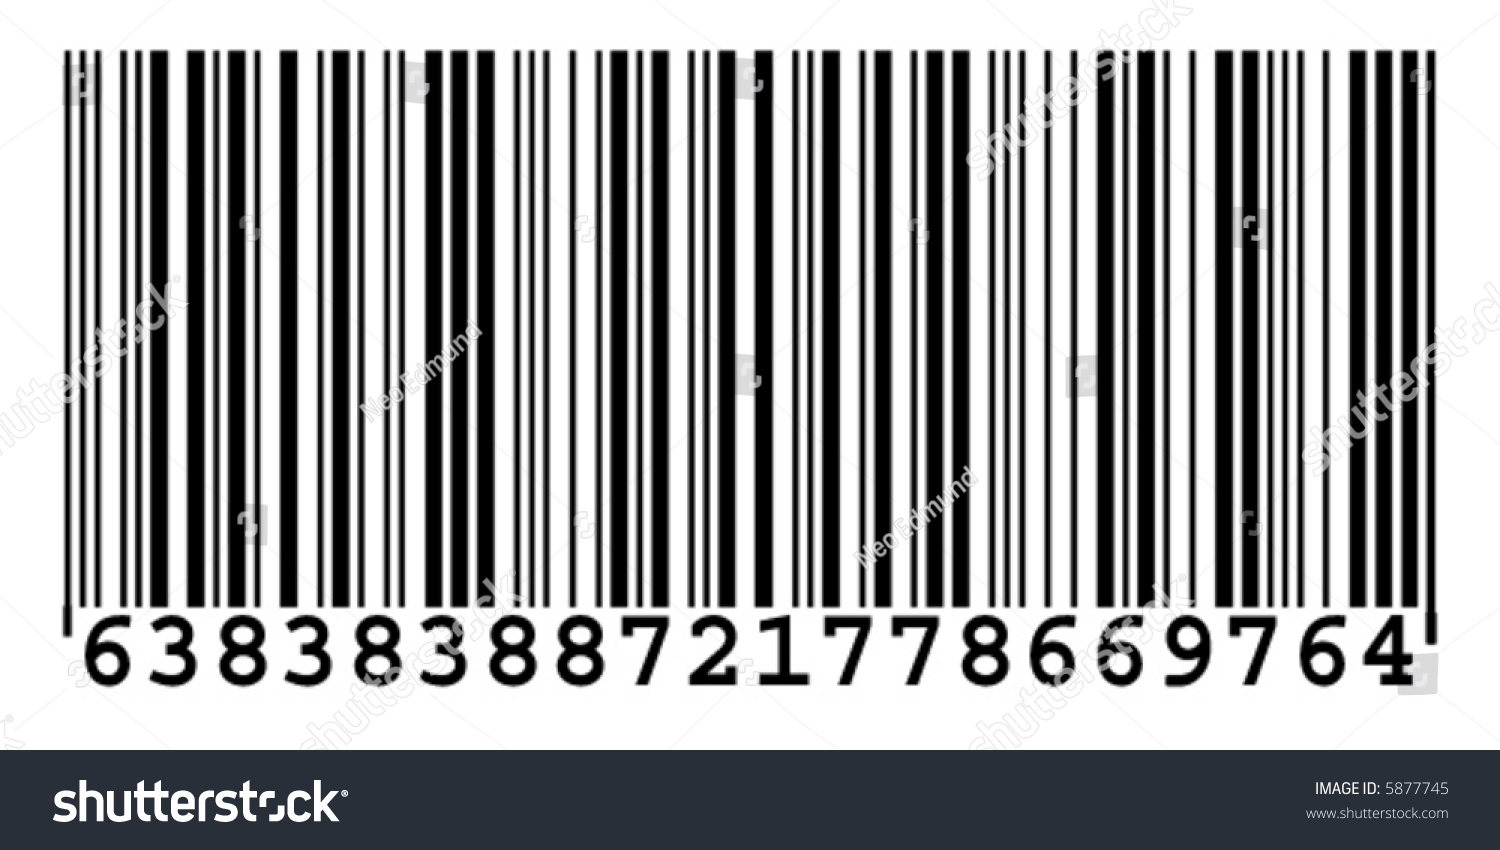 clipart of barcode - photo #32